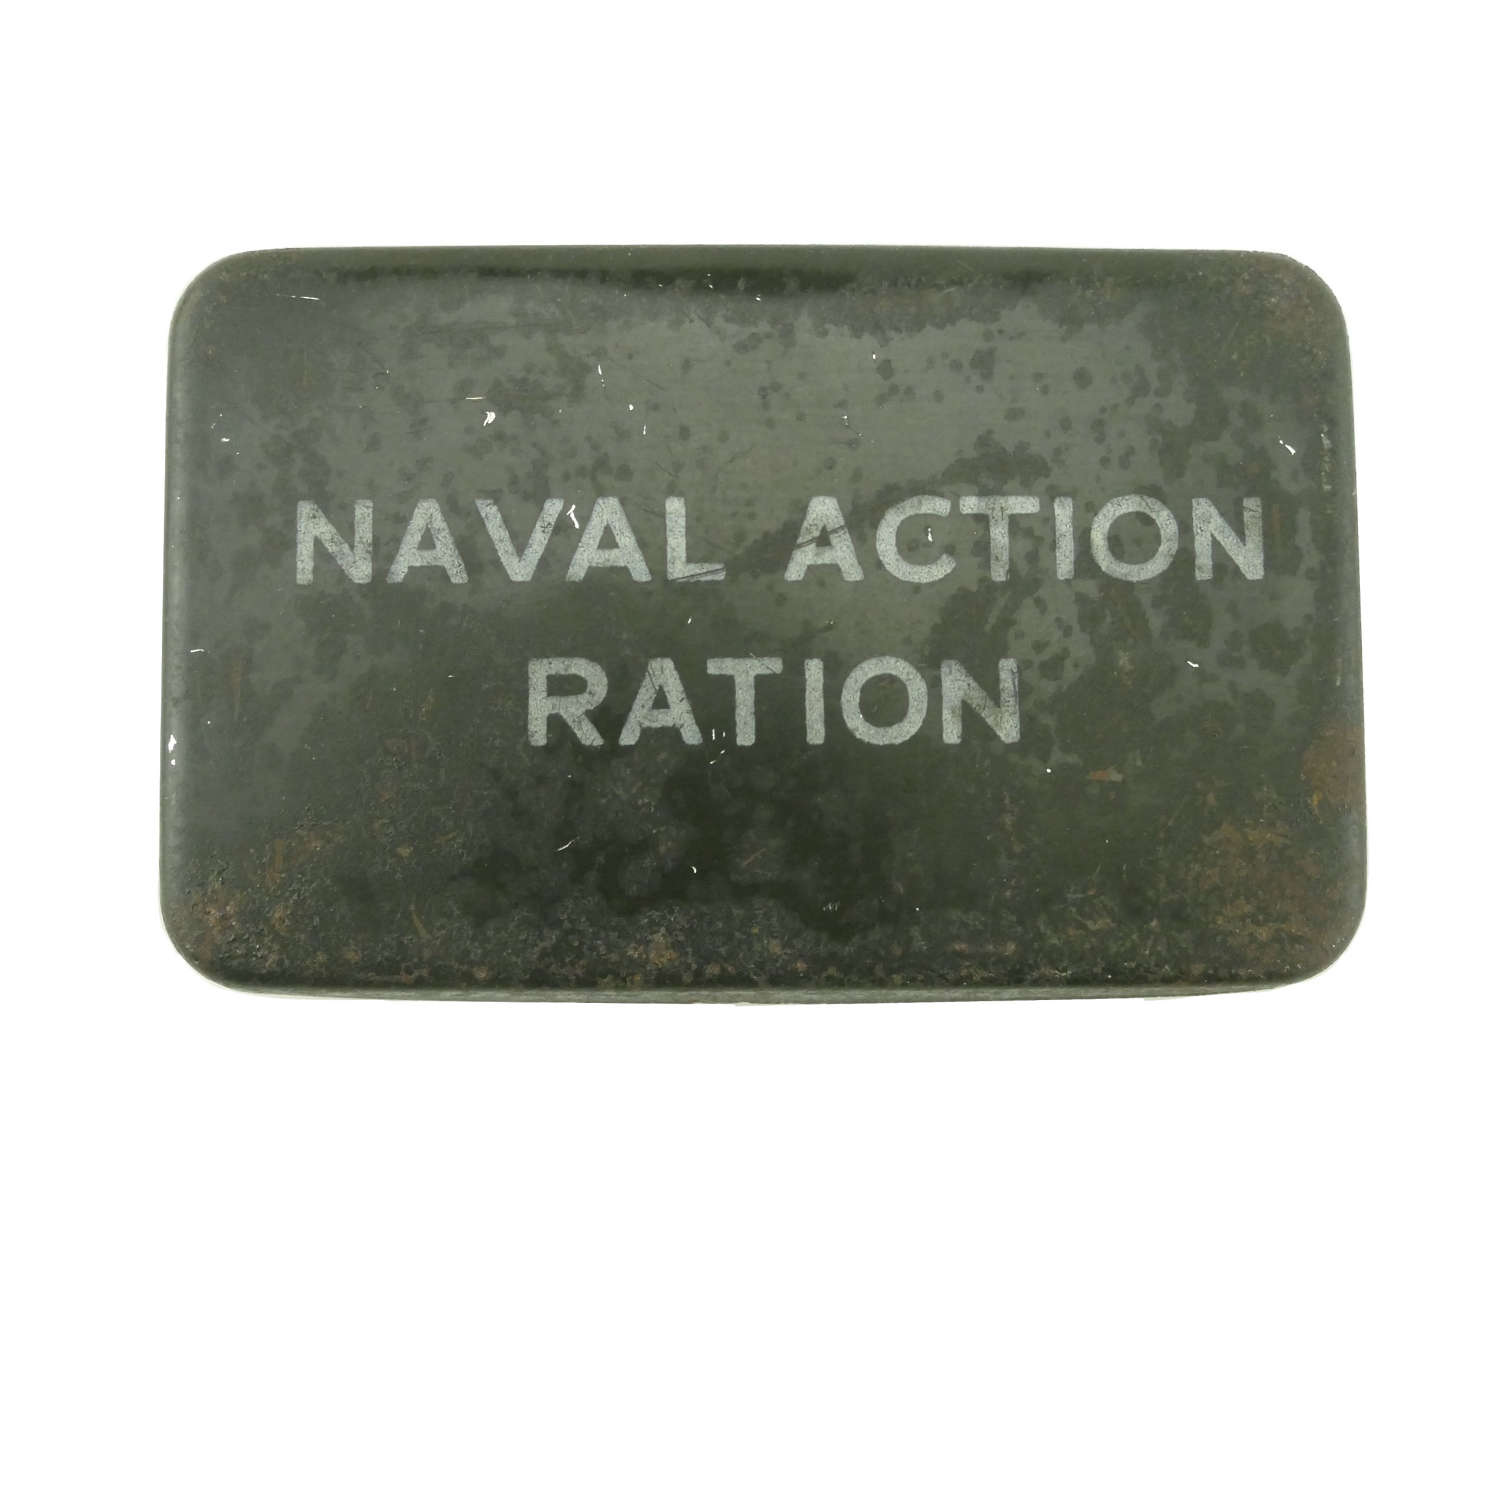 Naval Action Ration